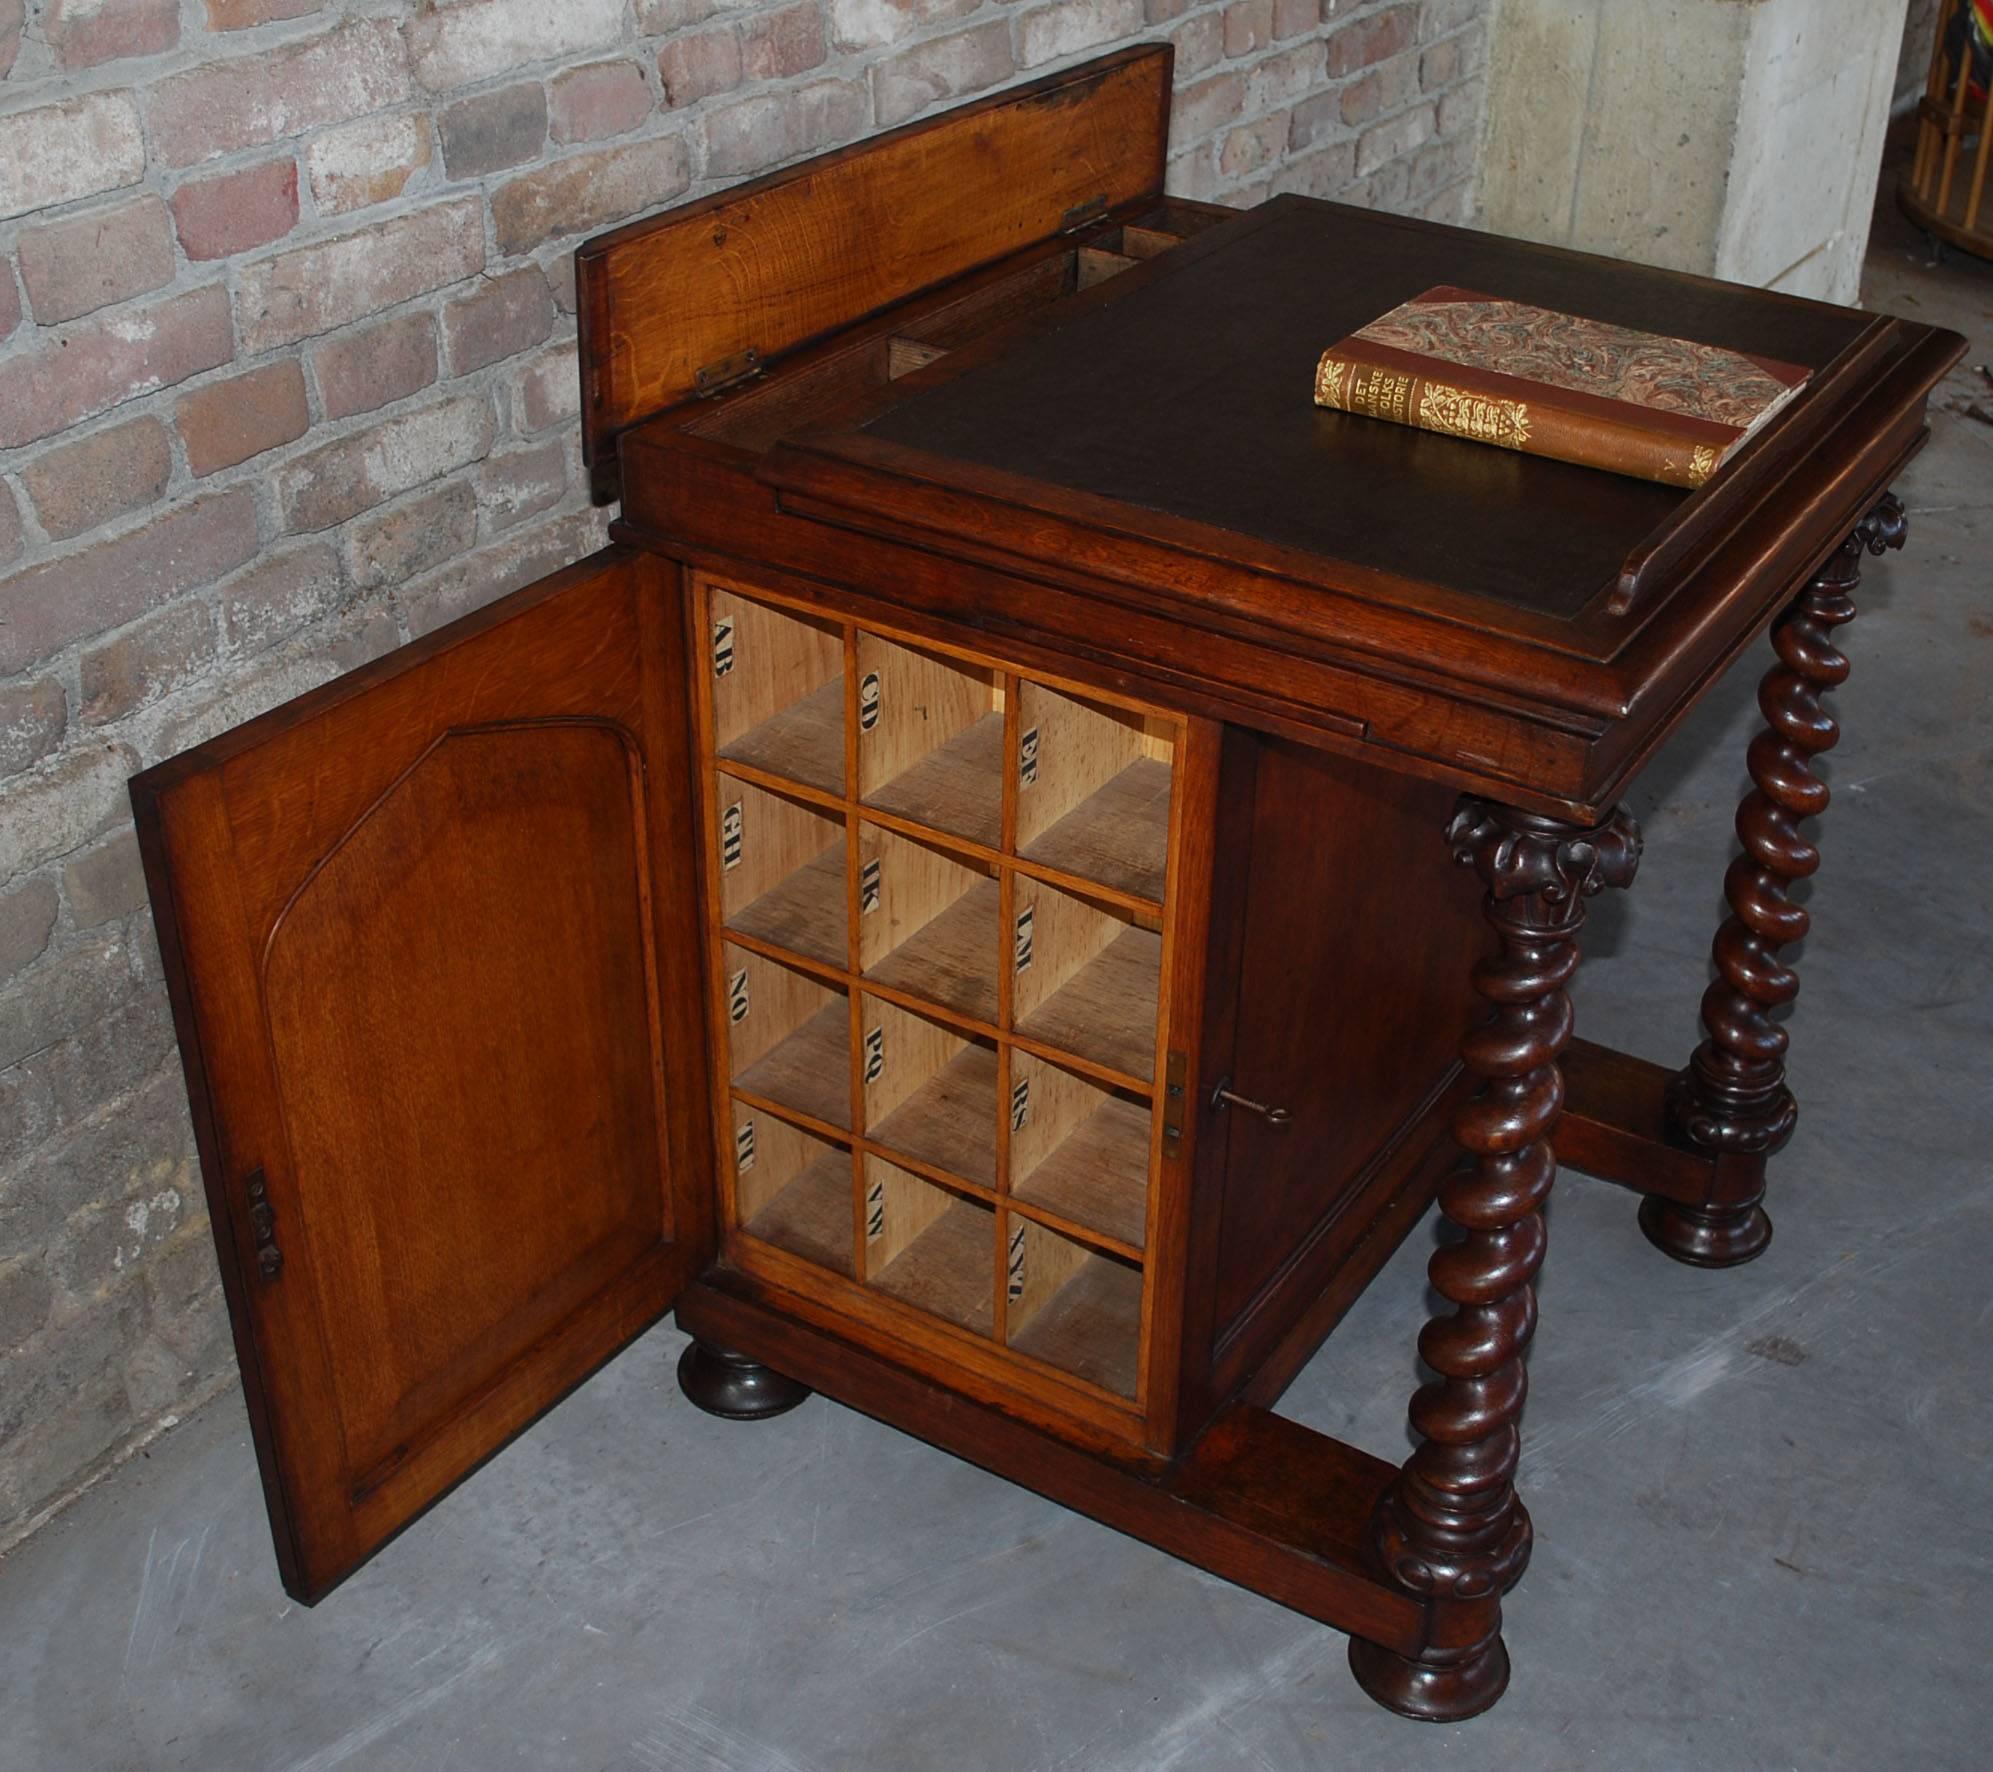 19th Century Oakwood Lectern Made by Robert Strahan 1